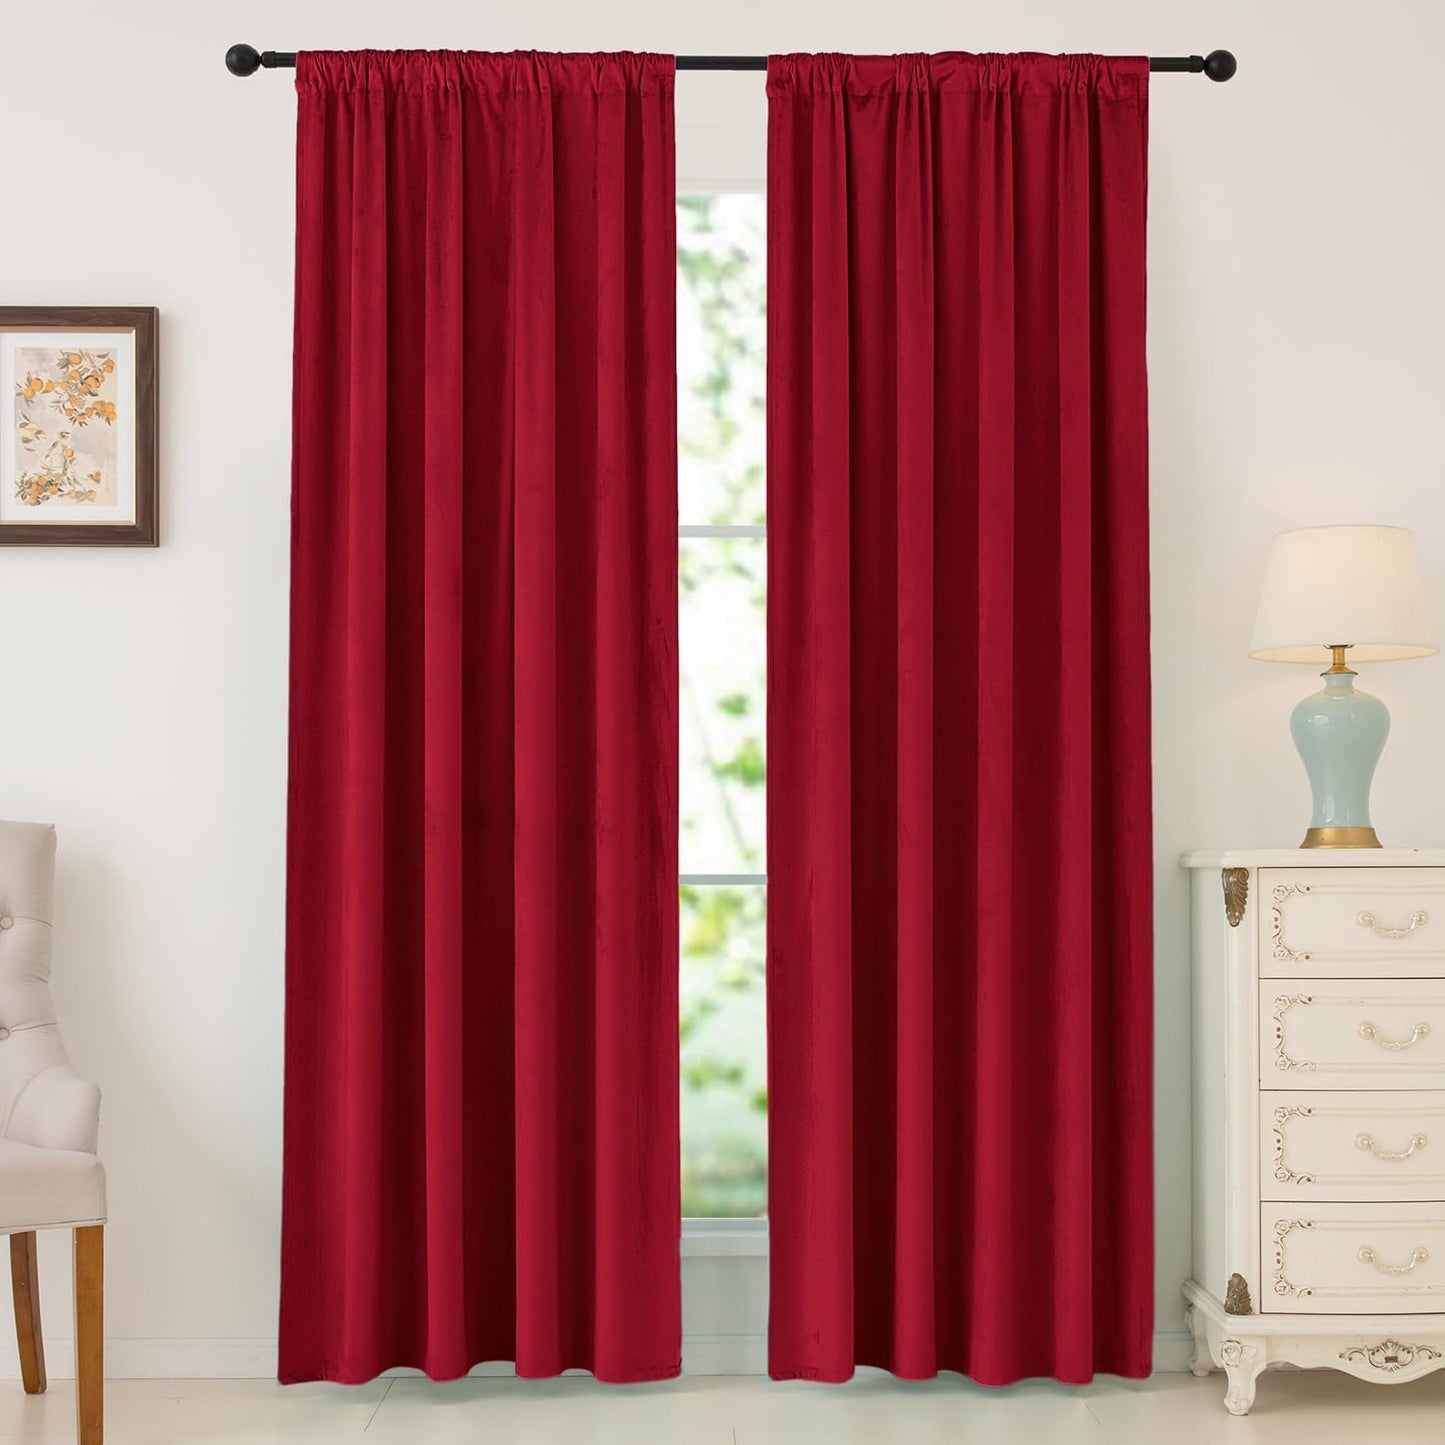 Nanbowang Green Velvet Curtains 63 Inches Long Dark Green Light Blocking Rod Pocket Window Curtain Panels Set of 2 Heat Insulated Curtains Thermal Curtain Panels for Bedroom  nanbowang Red 52"X84" 